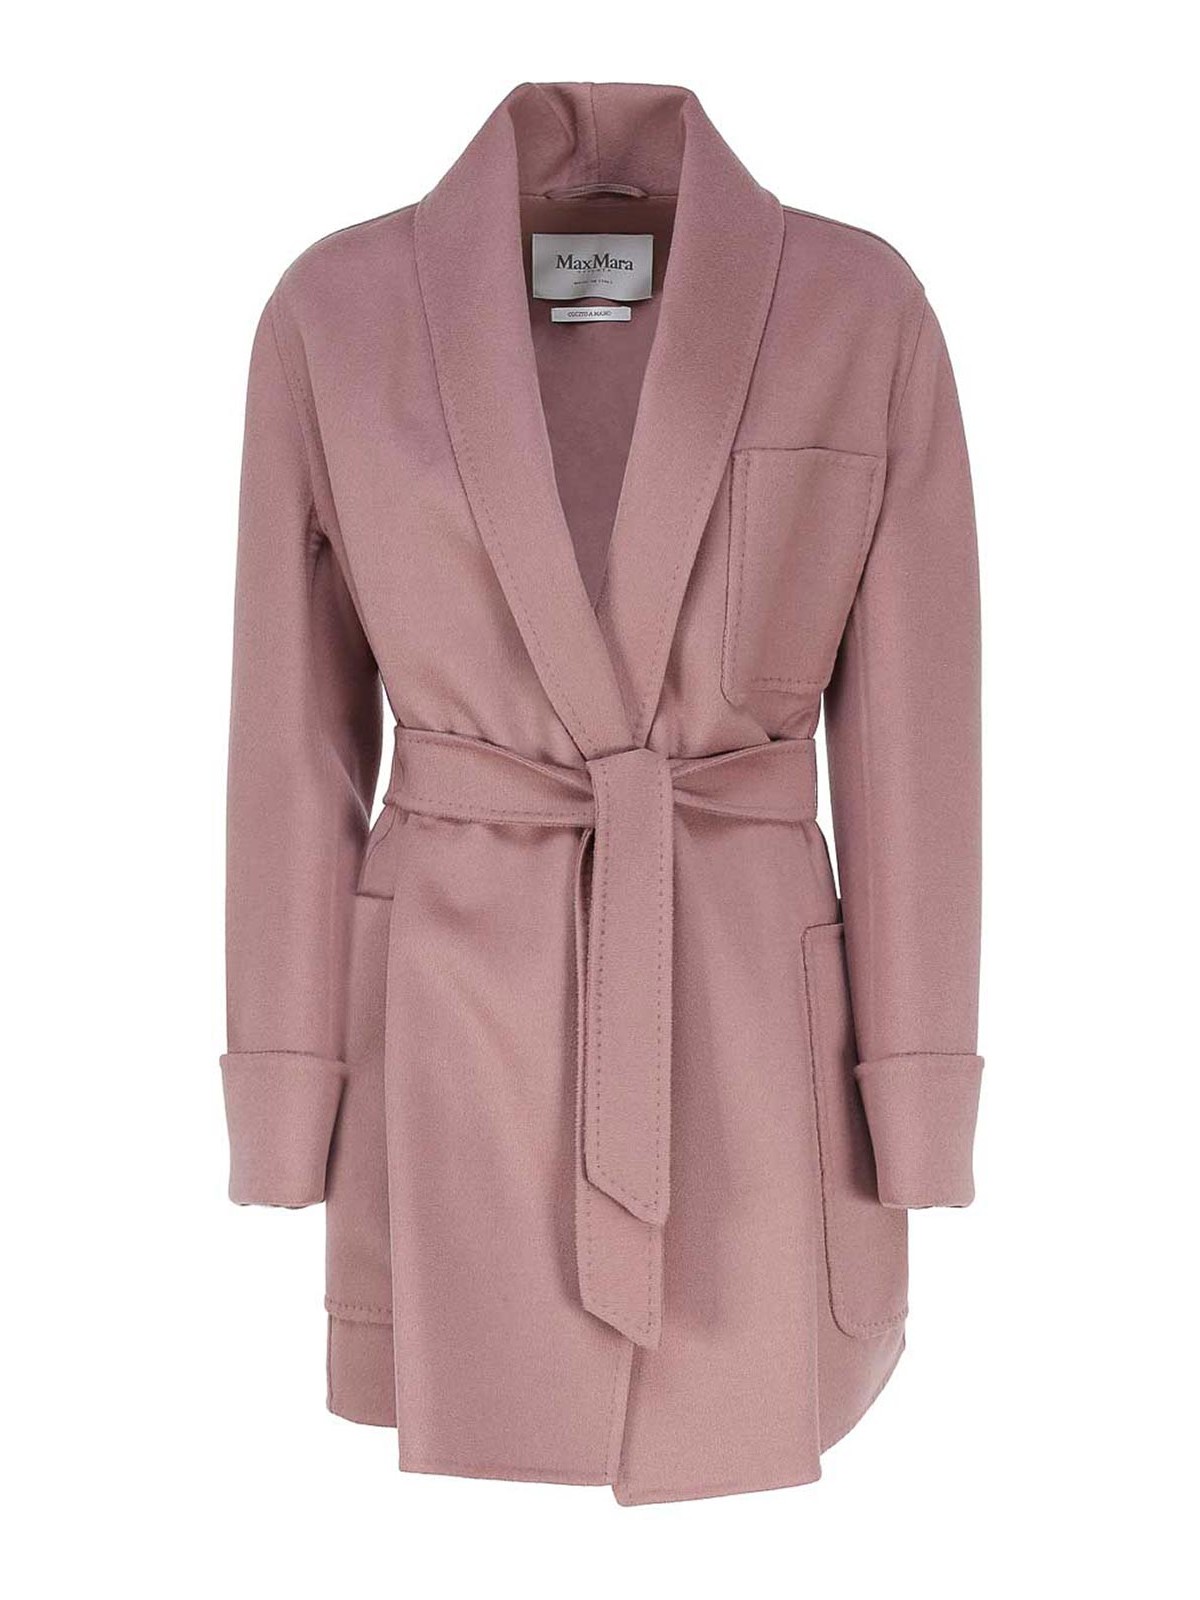 Max Mara Deconstructed Jacket In Wool And Cashmere In Nude & Neutrals